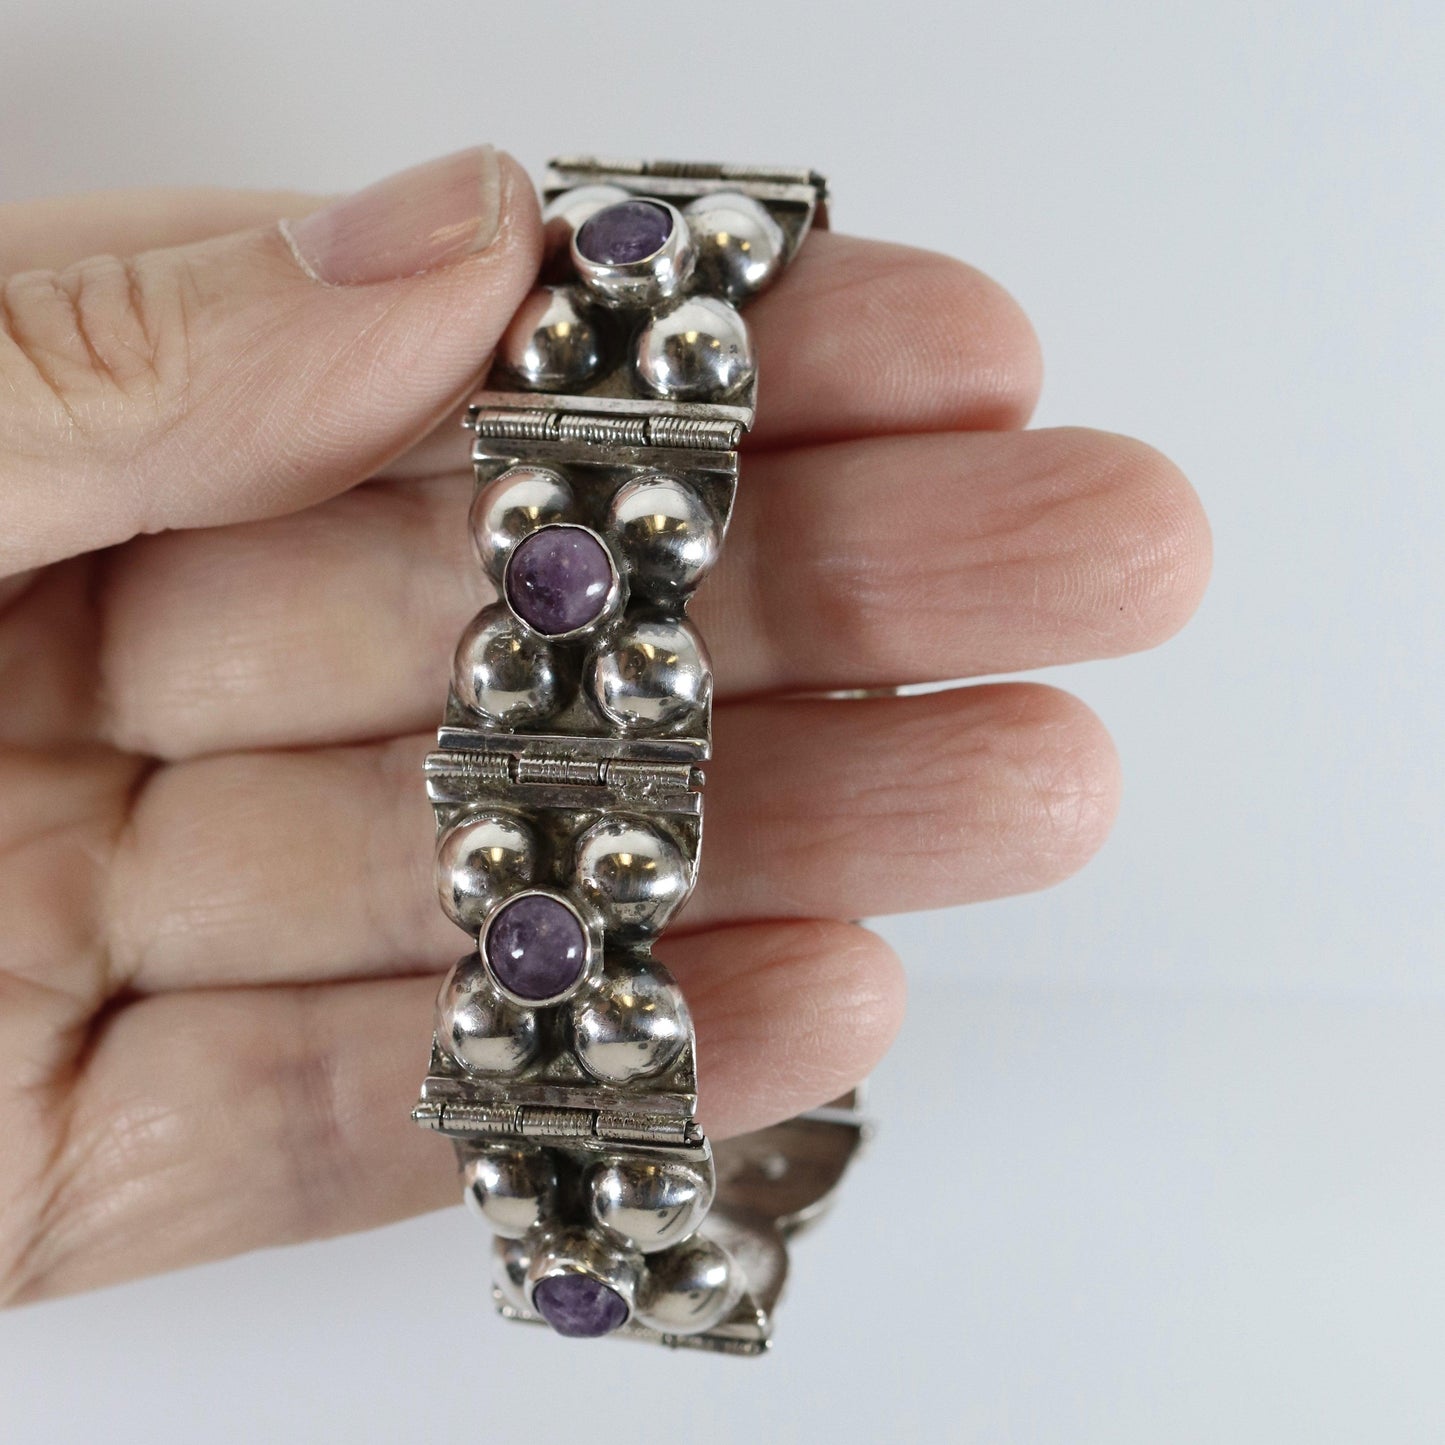 Vintage Silver Mexican Jewelry | Early Handcrafted Floral Amethyst Bracelet - Carmel Fine Silver Jewelry